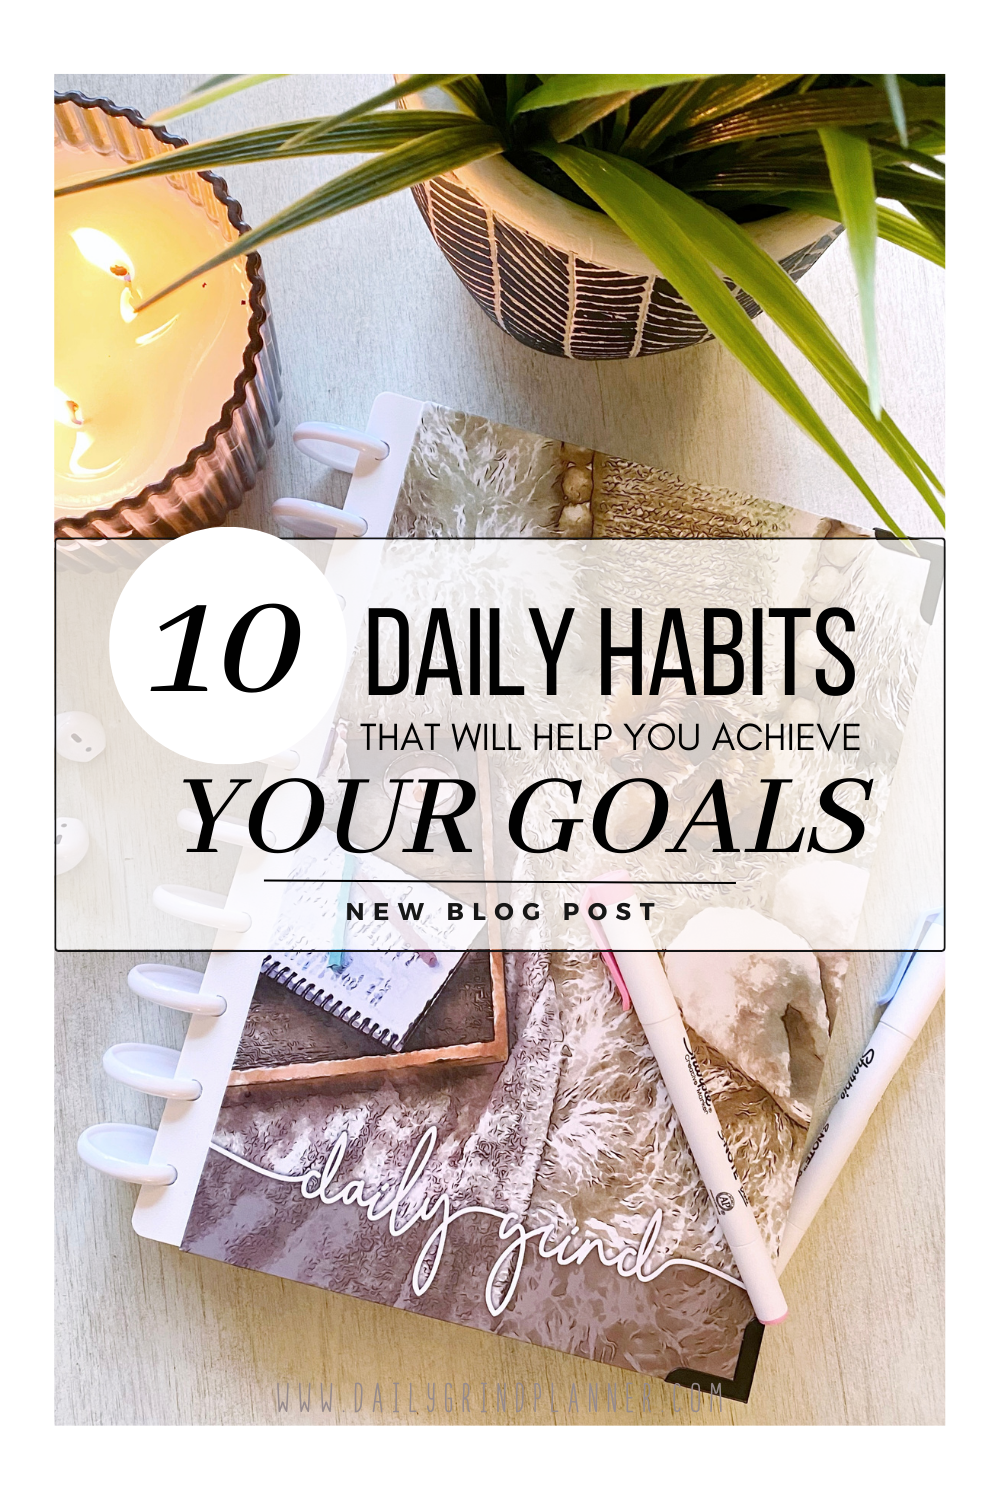 10 Daily Habits That Will Help You Achieve Your Goals